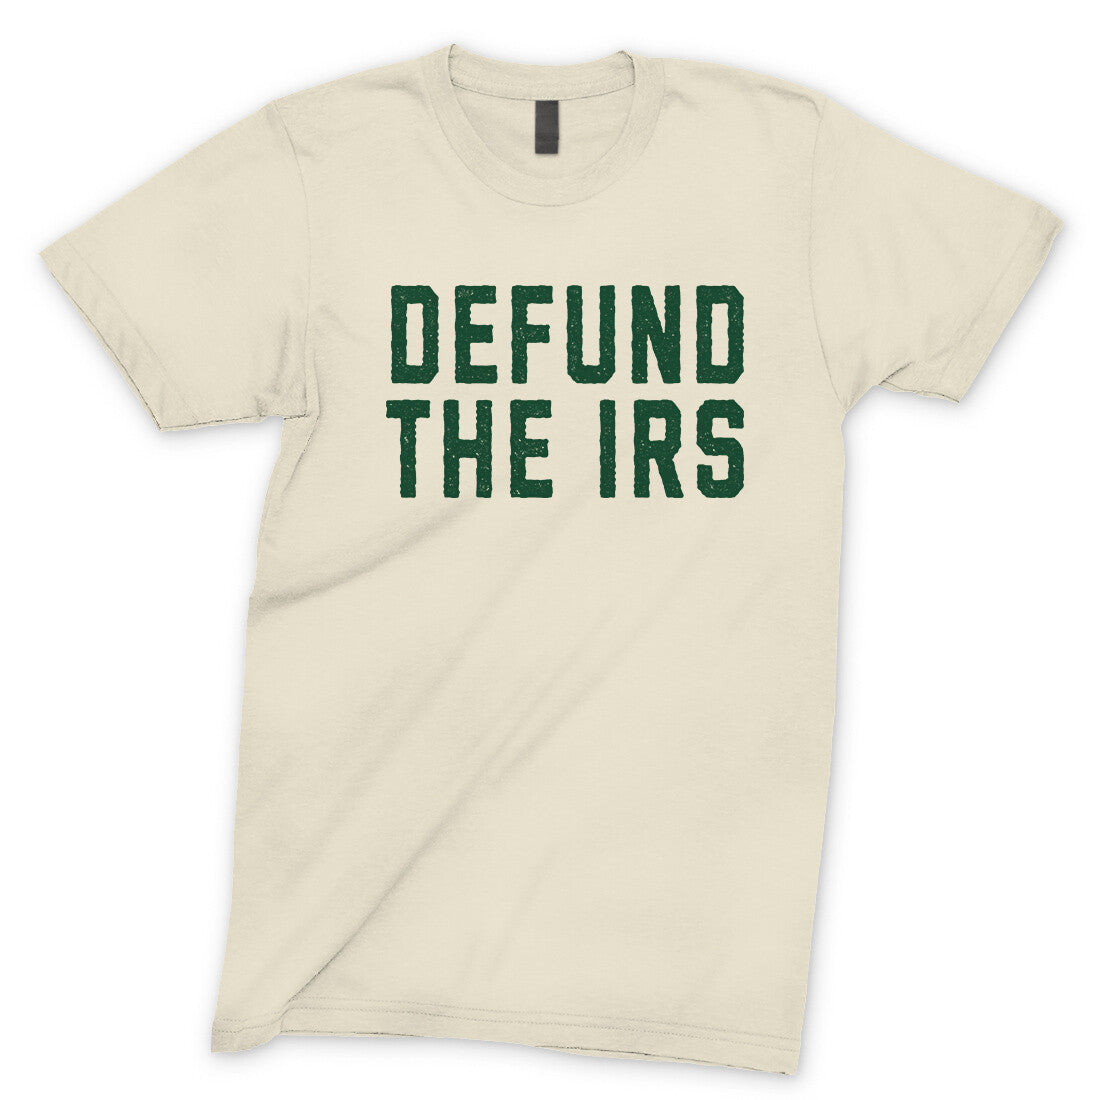 Defund the IRS in Natural Color